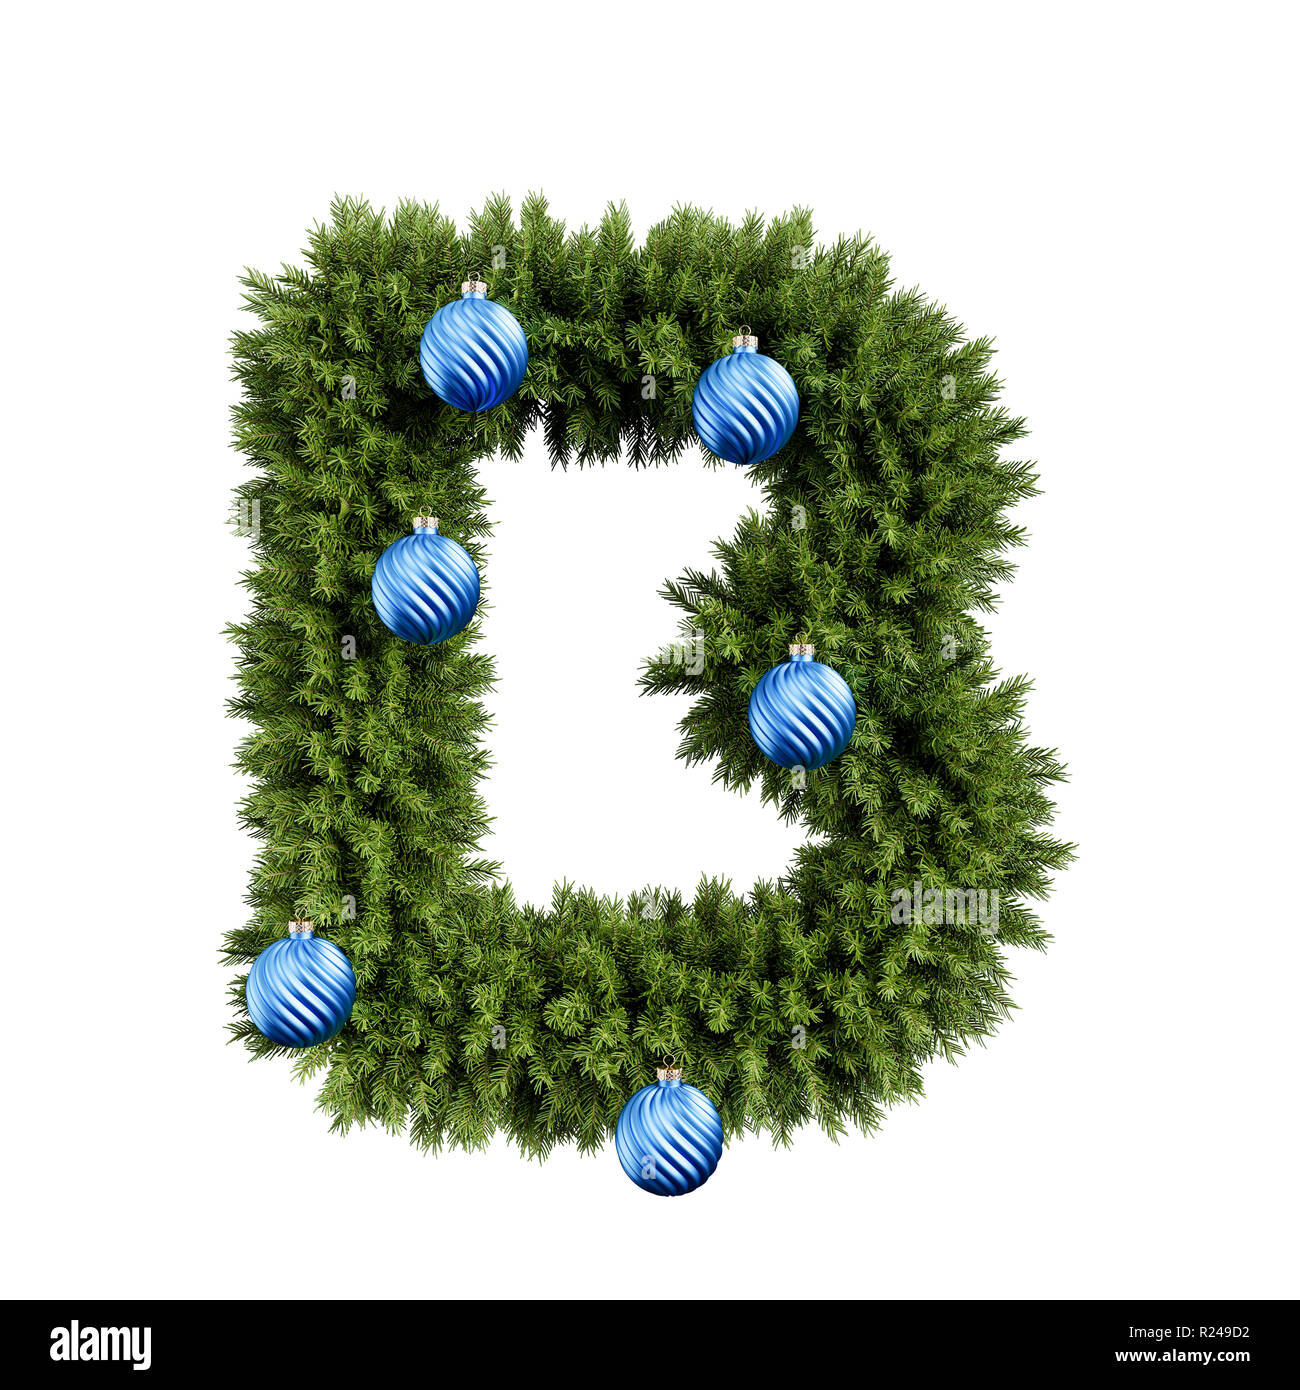 https://c8.alamy.com/comp/R249D2/christmas-alphabet-abc-character-letter-b-font-with-christmas-ball-christmas-tree-branches-capital-letters-decoration-type-with-christmas-sphere-hig-R249D2.jpg